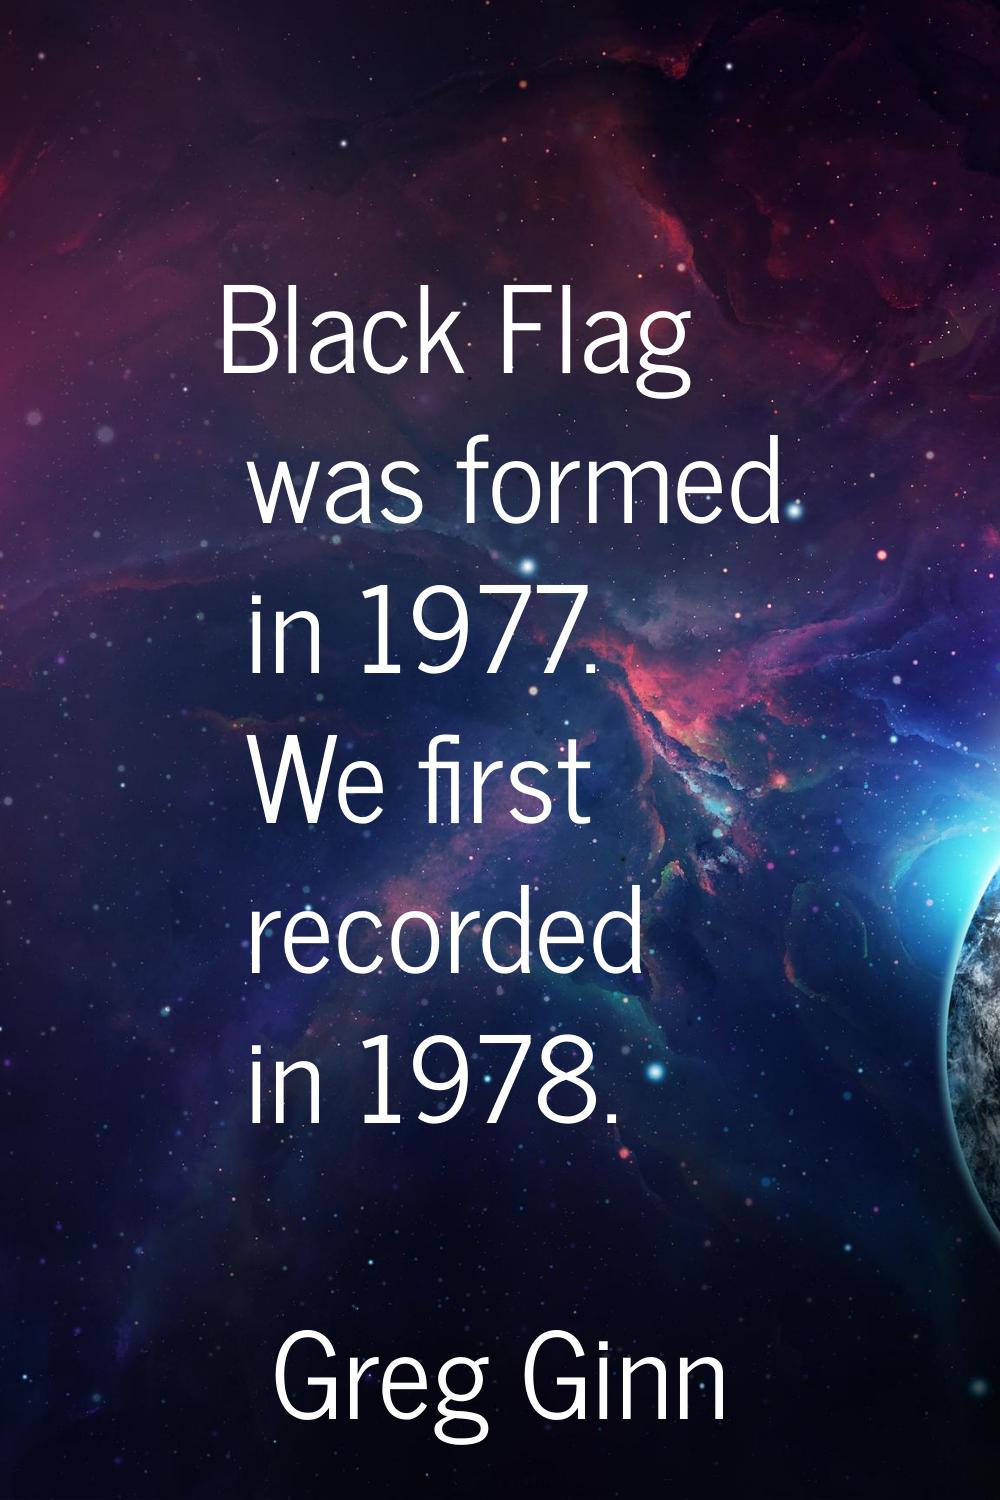 Black Flag was formed in 1977. We first recorded in 1978.